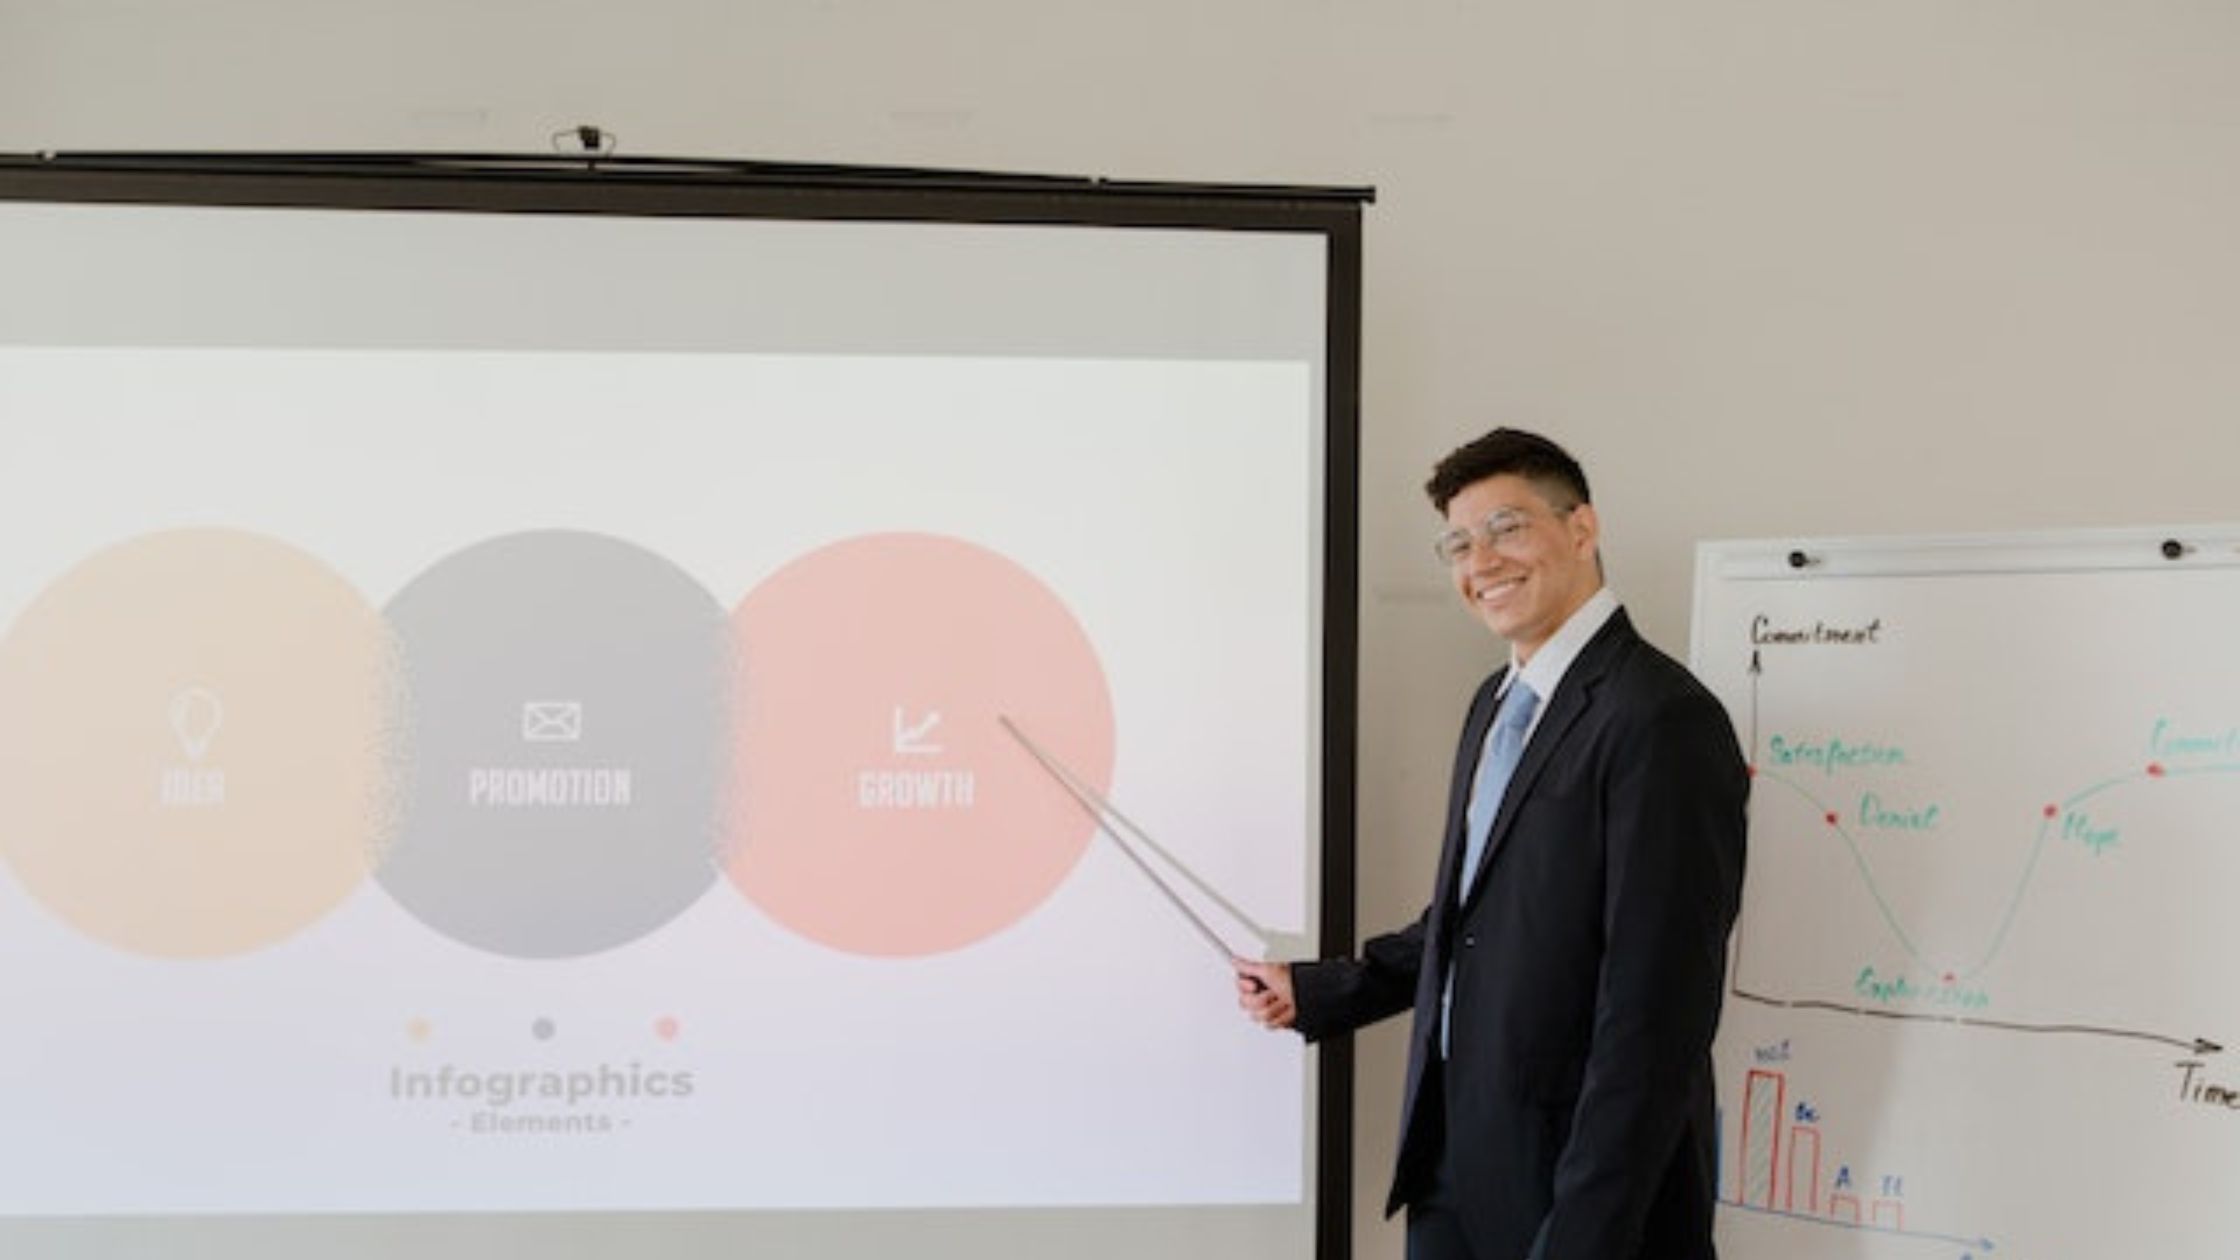 PowerPoint Hacks That Will Help You Quickly Become an Expert 1